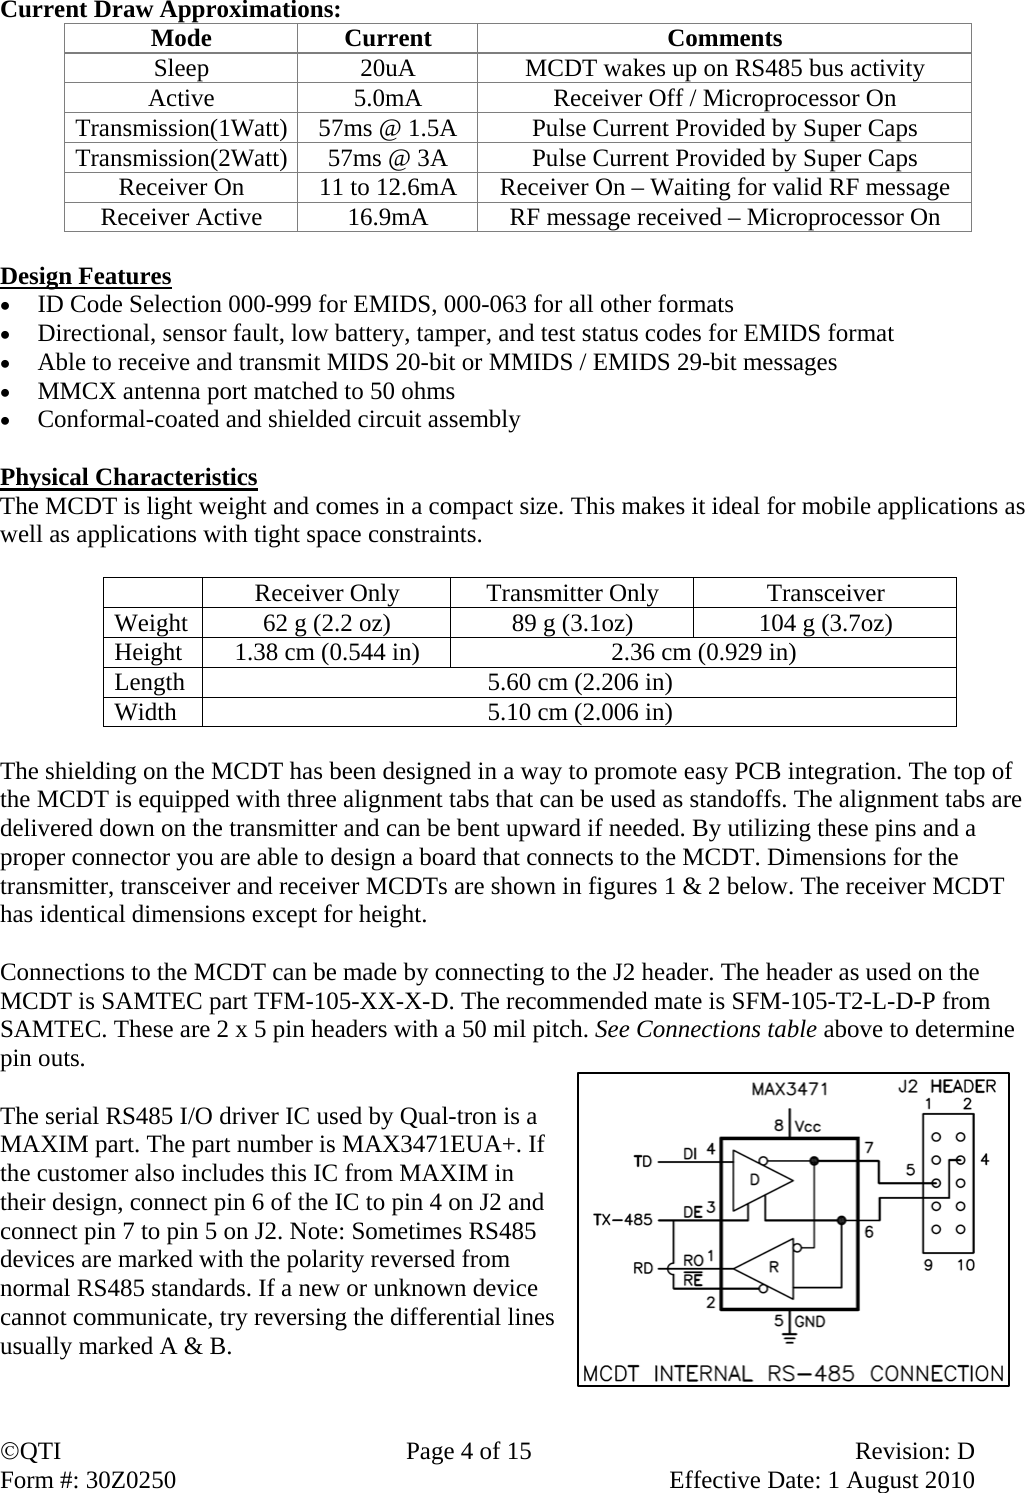 QTI  Page 4 of 15  Revision: D Form #: 30Z0250    Effective Date: 1 August 2010 Current Draw Approximations:   Mode Current  Comments Sleep  20uA  MCDT wakes up on RS485 bus activity Active  5.0mA  Receiver Off / Microprocessor On Transmission(1Watt)  57ms @ 1.5A  Pulse Current Provided by Super Caps Transmission(2Watt)  57ms @ 3A  Pulse Current Provided by Super Caps Receiver On  11 to 12.6mA  Receiver On – Waiting for valid RF message Receiver Active  16.9mA  RF message received – Microprocessor On    Design Features  ID Code Selection 000-999 for EMIDS, 000-063 for all other formats  Directional, sensor fault, low battery, tamper, and test status codes for EMIDS format  Able to receive and transmit MIDS 20-bit or MMIDS / EMIDS 29-bit messages  MMCX antenna port matched to 50 ohms  Conformal-coated and shielded circuit assembly  Physical Characteristics The MCDT is light weight and comes in a compact size. This makes it ideal for mobile applications as well as applications with tight space constraints.   Receiver Only Transmitter Only  Transceiver Weight  62 g (2.2 oz)  89 g (3.1oz)  104 g (3.7oz) Height  1.38 cm (0.544 in)  2.36 cm (0.929 in) Length  5.60 cm (2.206 in) Width  5.10 cm (2.006 in)  The shielding on the MCDT has been designed in a way to promote easy PCB integration. The top of the MCDT is equipped with three alignment tabs that can be used as standoffs. The alignment tabs are delivered down on the transmitter and can be bent upward if needed. By utilizing these pins and a proper connector you are able to design a board that connects to the MCDT. Dimensions for the transmitter, transceiver and receiver MCDTs are shown in figures 1 &amp; 2 below. The receiver MCDT has identical dimensions except for height.  Connections to the MCDT can be made by connecting to the J2 header. The header as used on the MCDT is SAMTEC part TFM-105-XX-X-D. The recommended mate is SFM-105-T2-L-D-P from SAMTEC. These are 2 x 5 pin headers with a 50 mil pitch. See Connections table above to determine pin outs.   The serial RS485 I/O driver IC used by Qual-tron is a MAXIM part. The part number is MAX3471EUA+. If the customer also includes this IC from MAXIM in their design, connect pin 6 of the IC to pin 4 on J2 and connect pin 7 to pin 5 on J2. Note: Sometimes RS485 devices are marked with the polarity reversed from normal RS485 standards. If a new or unknown device cannot communicate, try reversing the differential lines usually marked A &amp; B.   